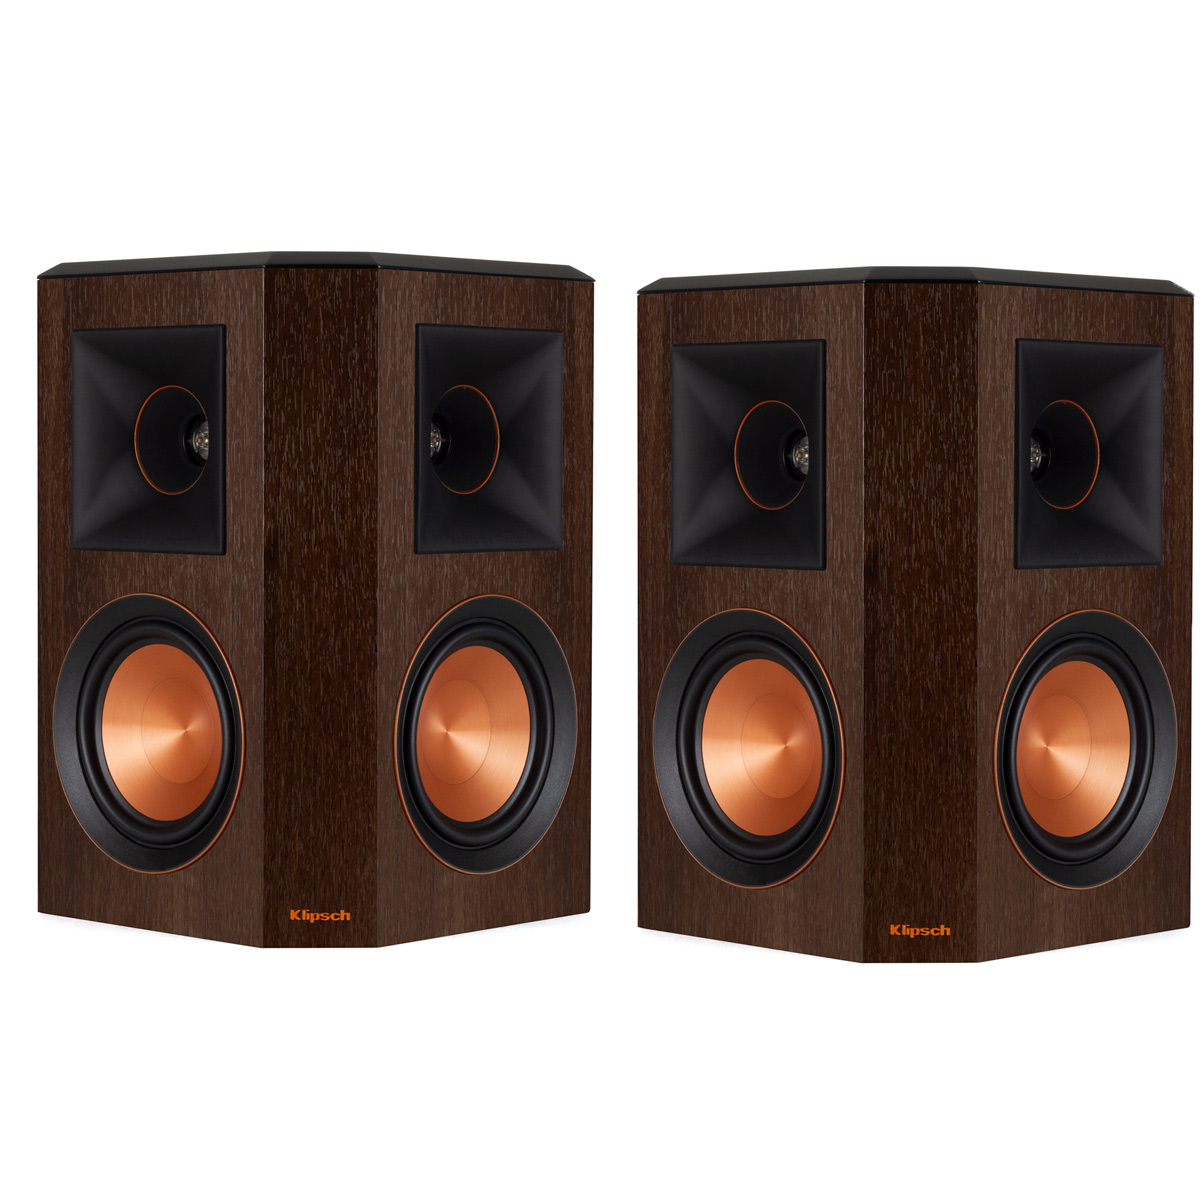 Klipsch RP-502S Reference Premiere Surround Speakers - Pair (Walnut) - image 1 of 3